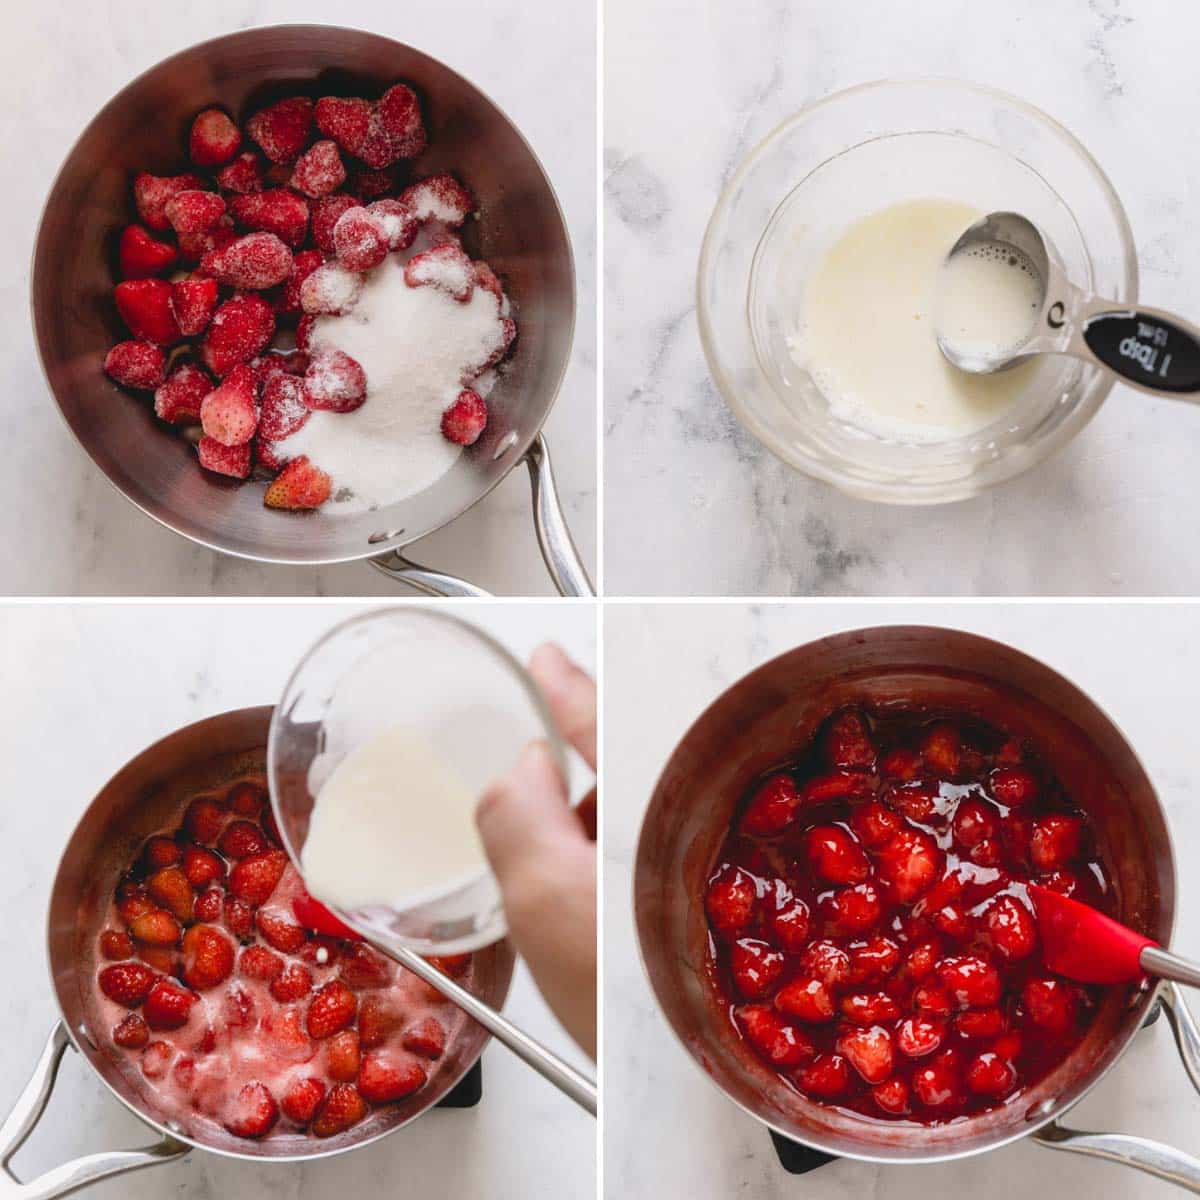 Four images showing the process of making strawberry sauce in a pot.